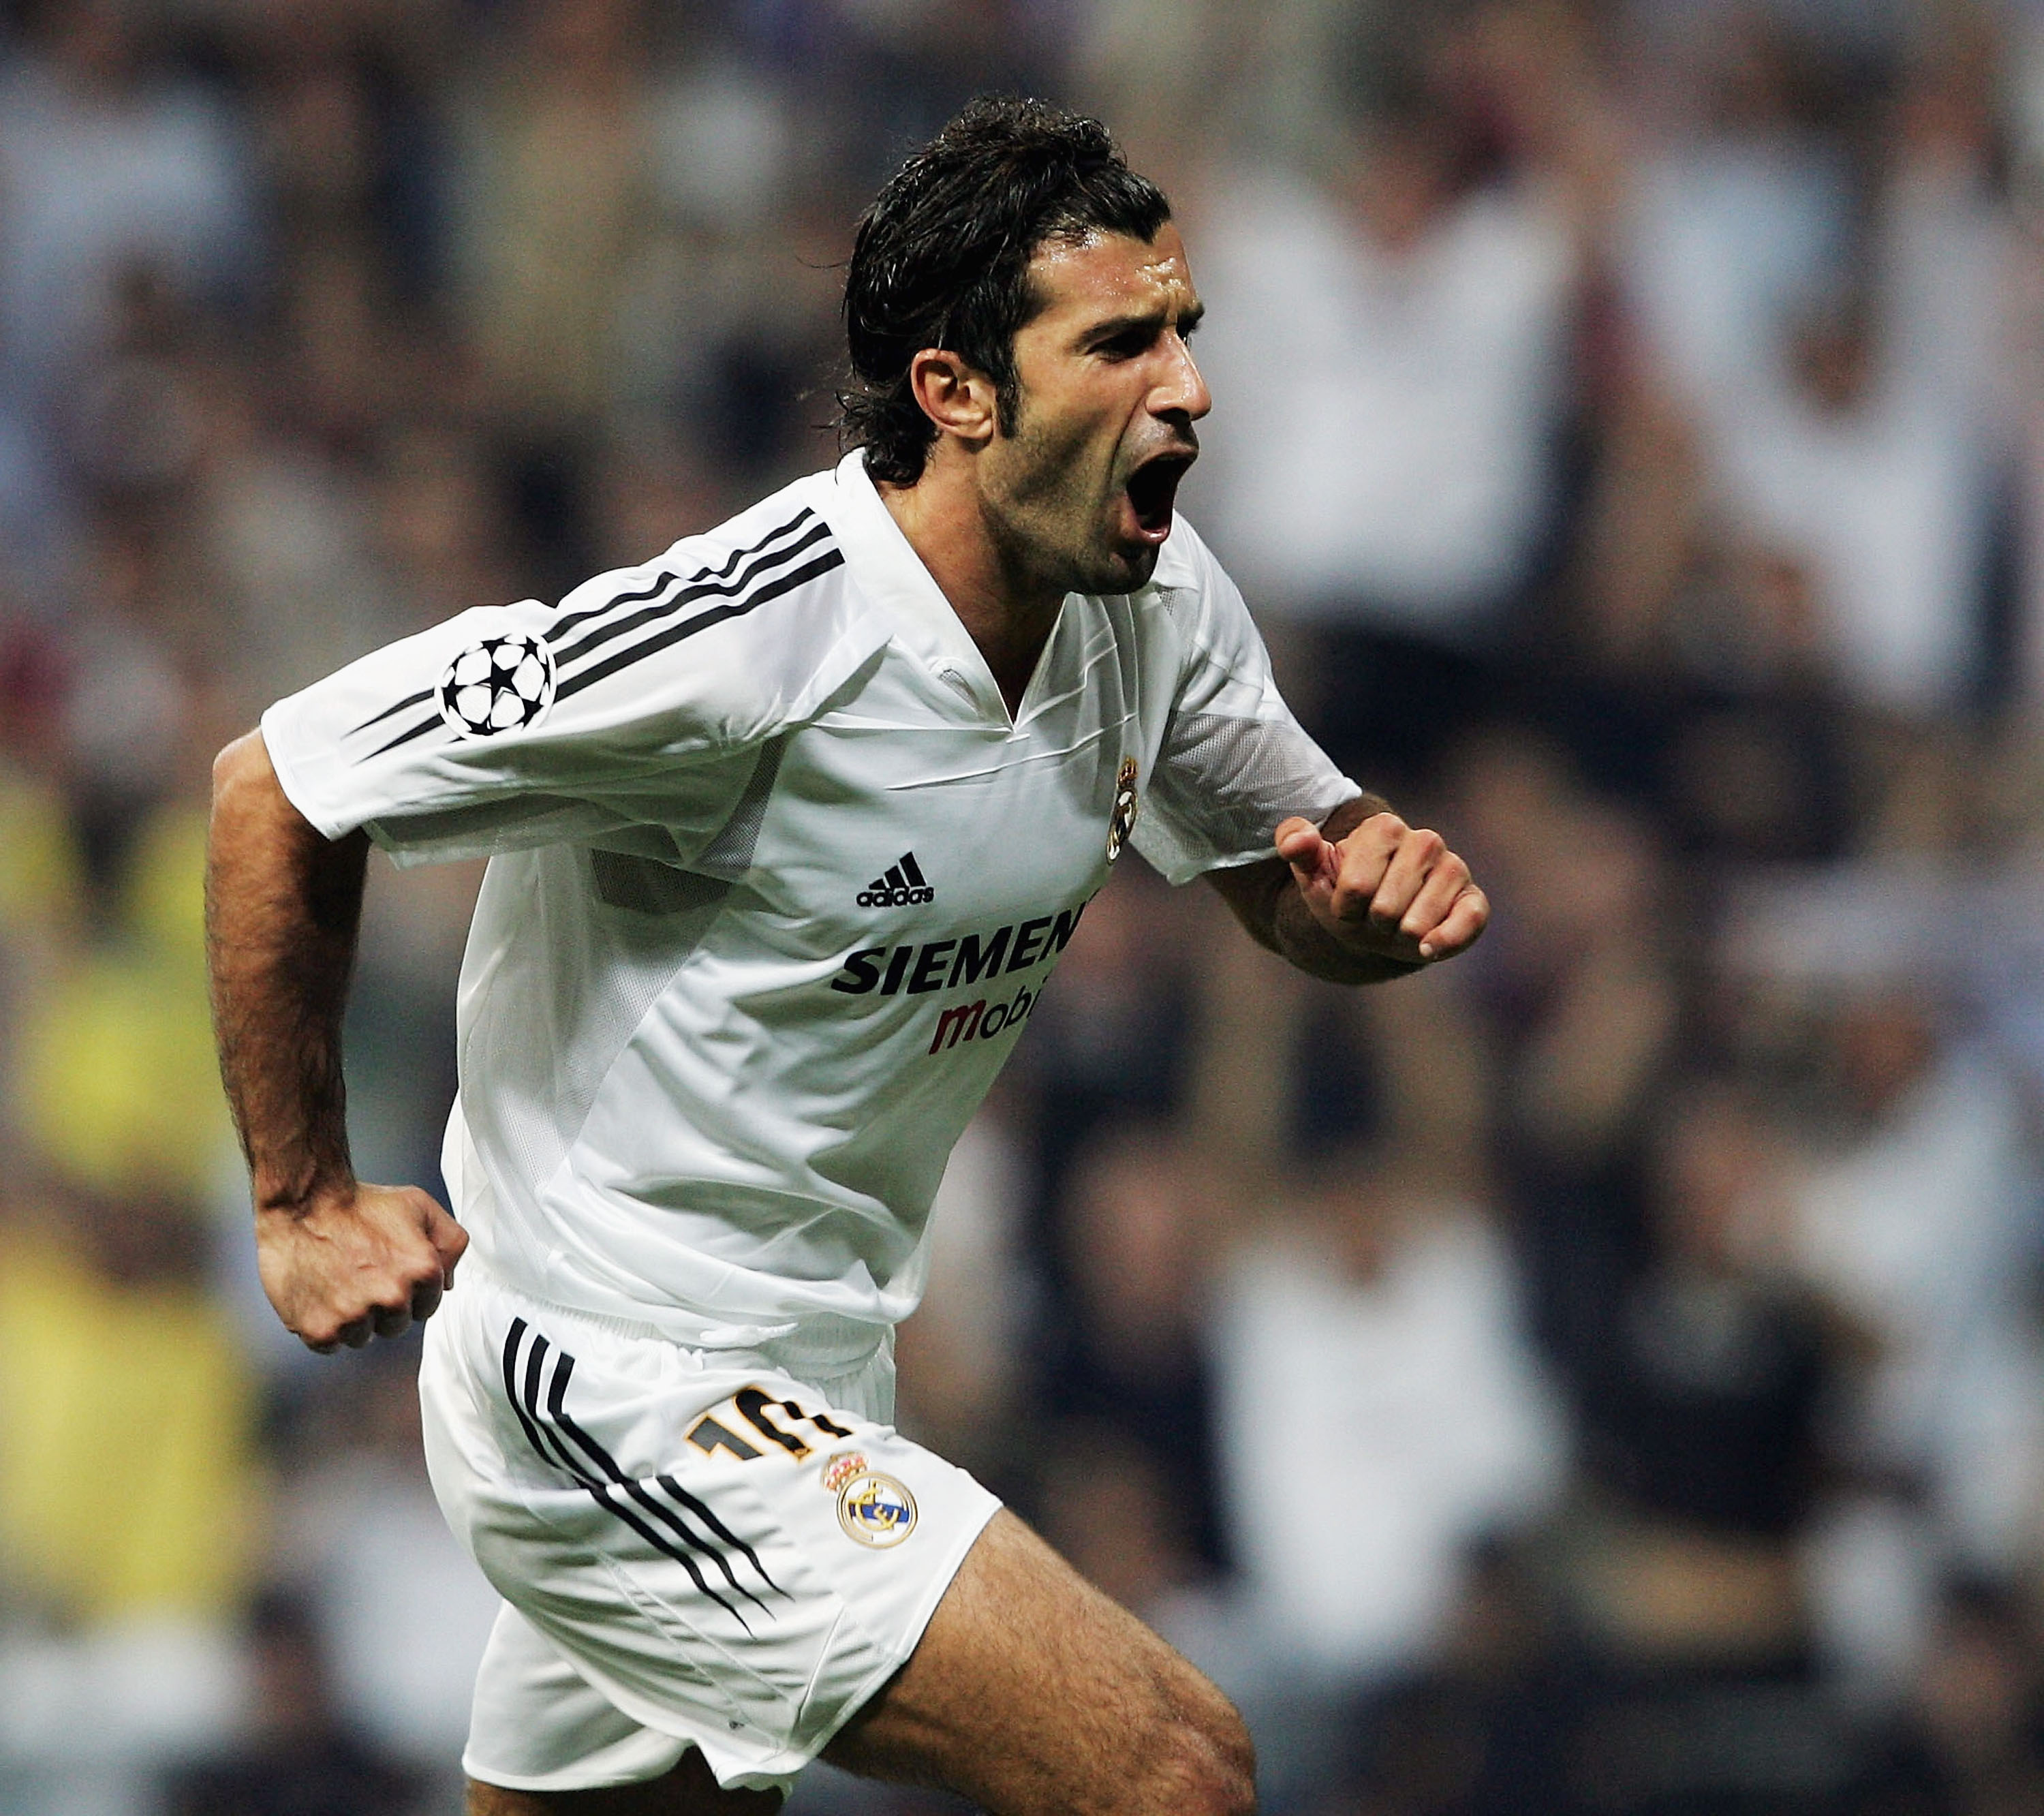 MADRID, SPAIN - SEPTEMBER 28:  Luis Figo of Real Madrid celebrates after scorig during the UEFA Champions League Group B match between Real Madrid and Roma at the Santiago Bernabeu Stadium on September 28, 2004 in Madrid, Spain.  (Photo by Shaun Botterill